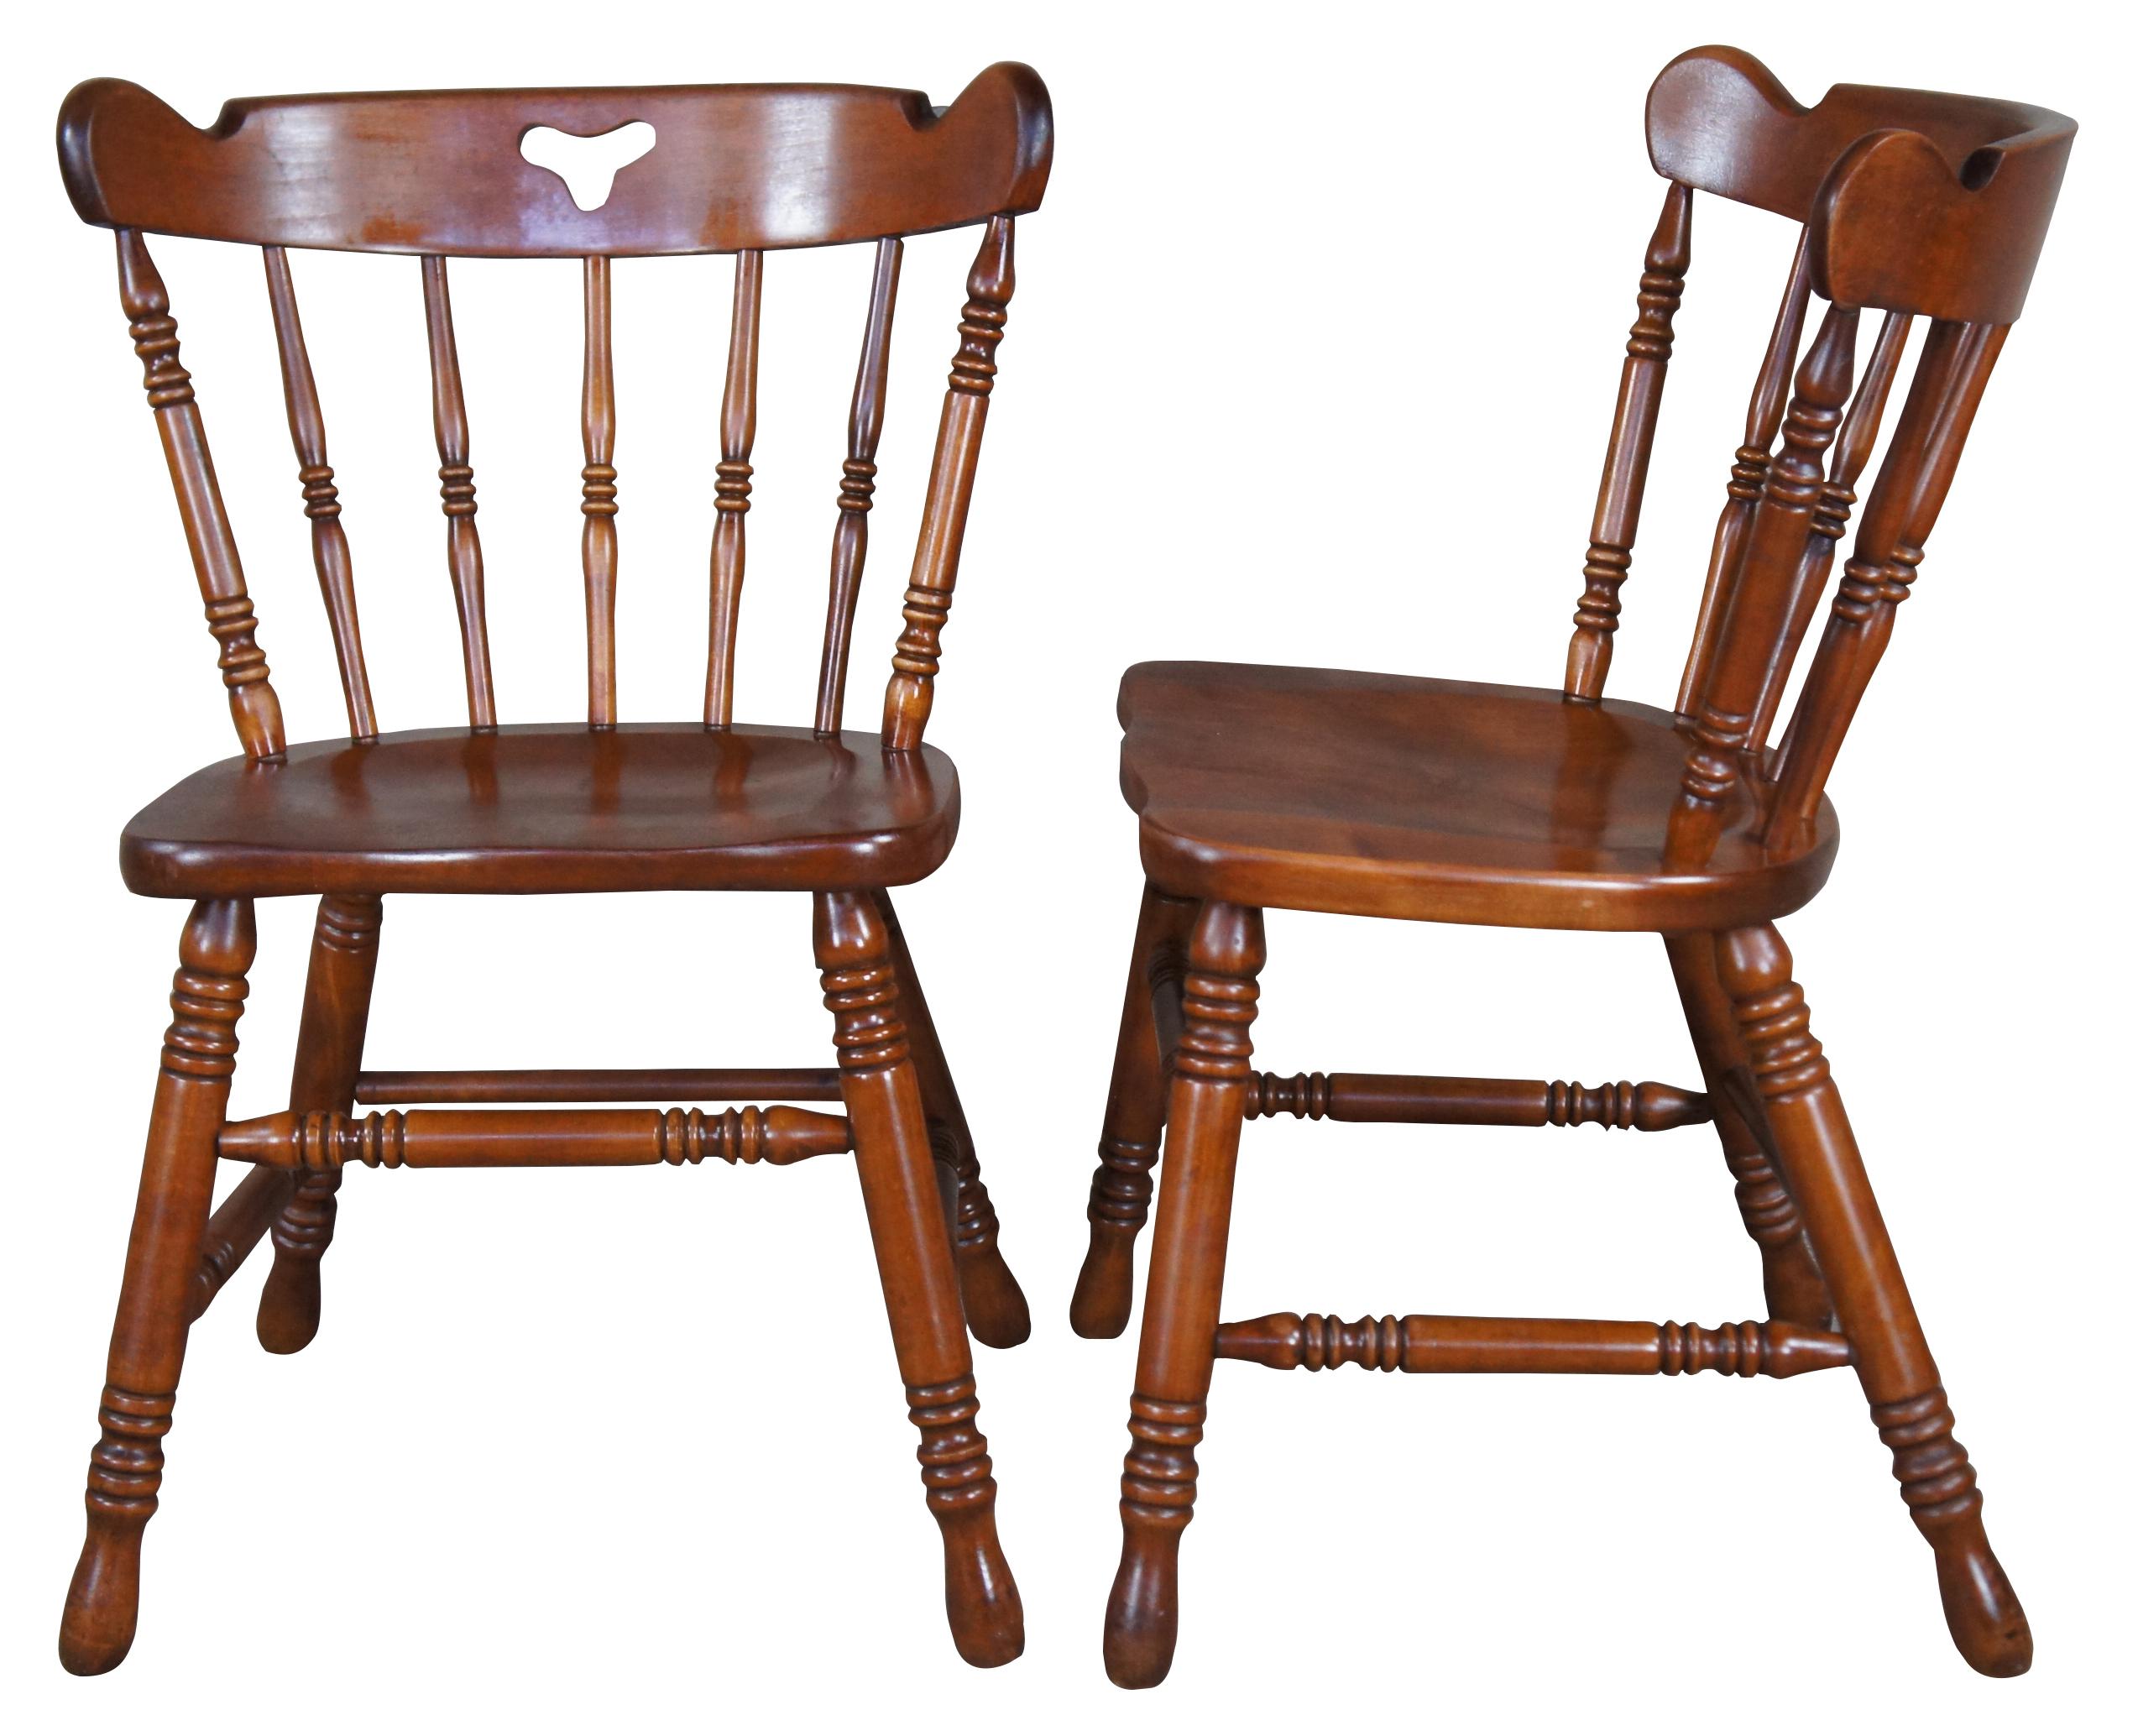 6 Tell City chair Company hard rock maple dining chairs, circa 1960s. Features colonial styling with a spindled windsor back with cutout and a contoured seat. 

The Tell City Furniture Company, also known as the Tell City Chair company, was one of